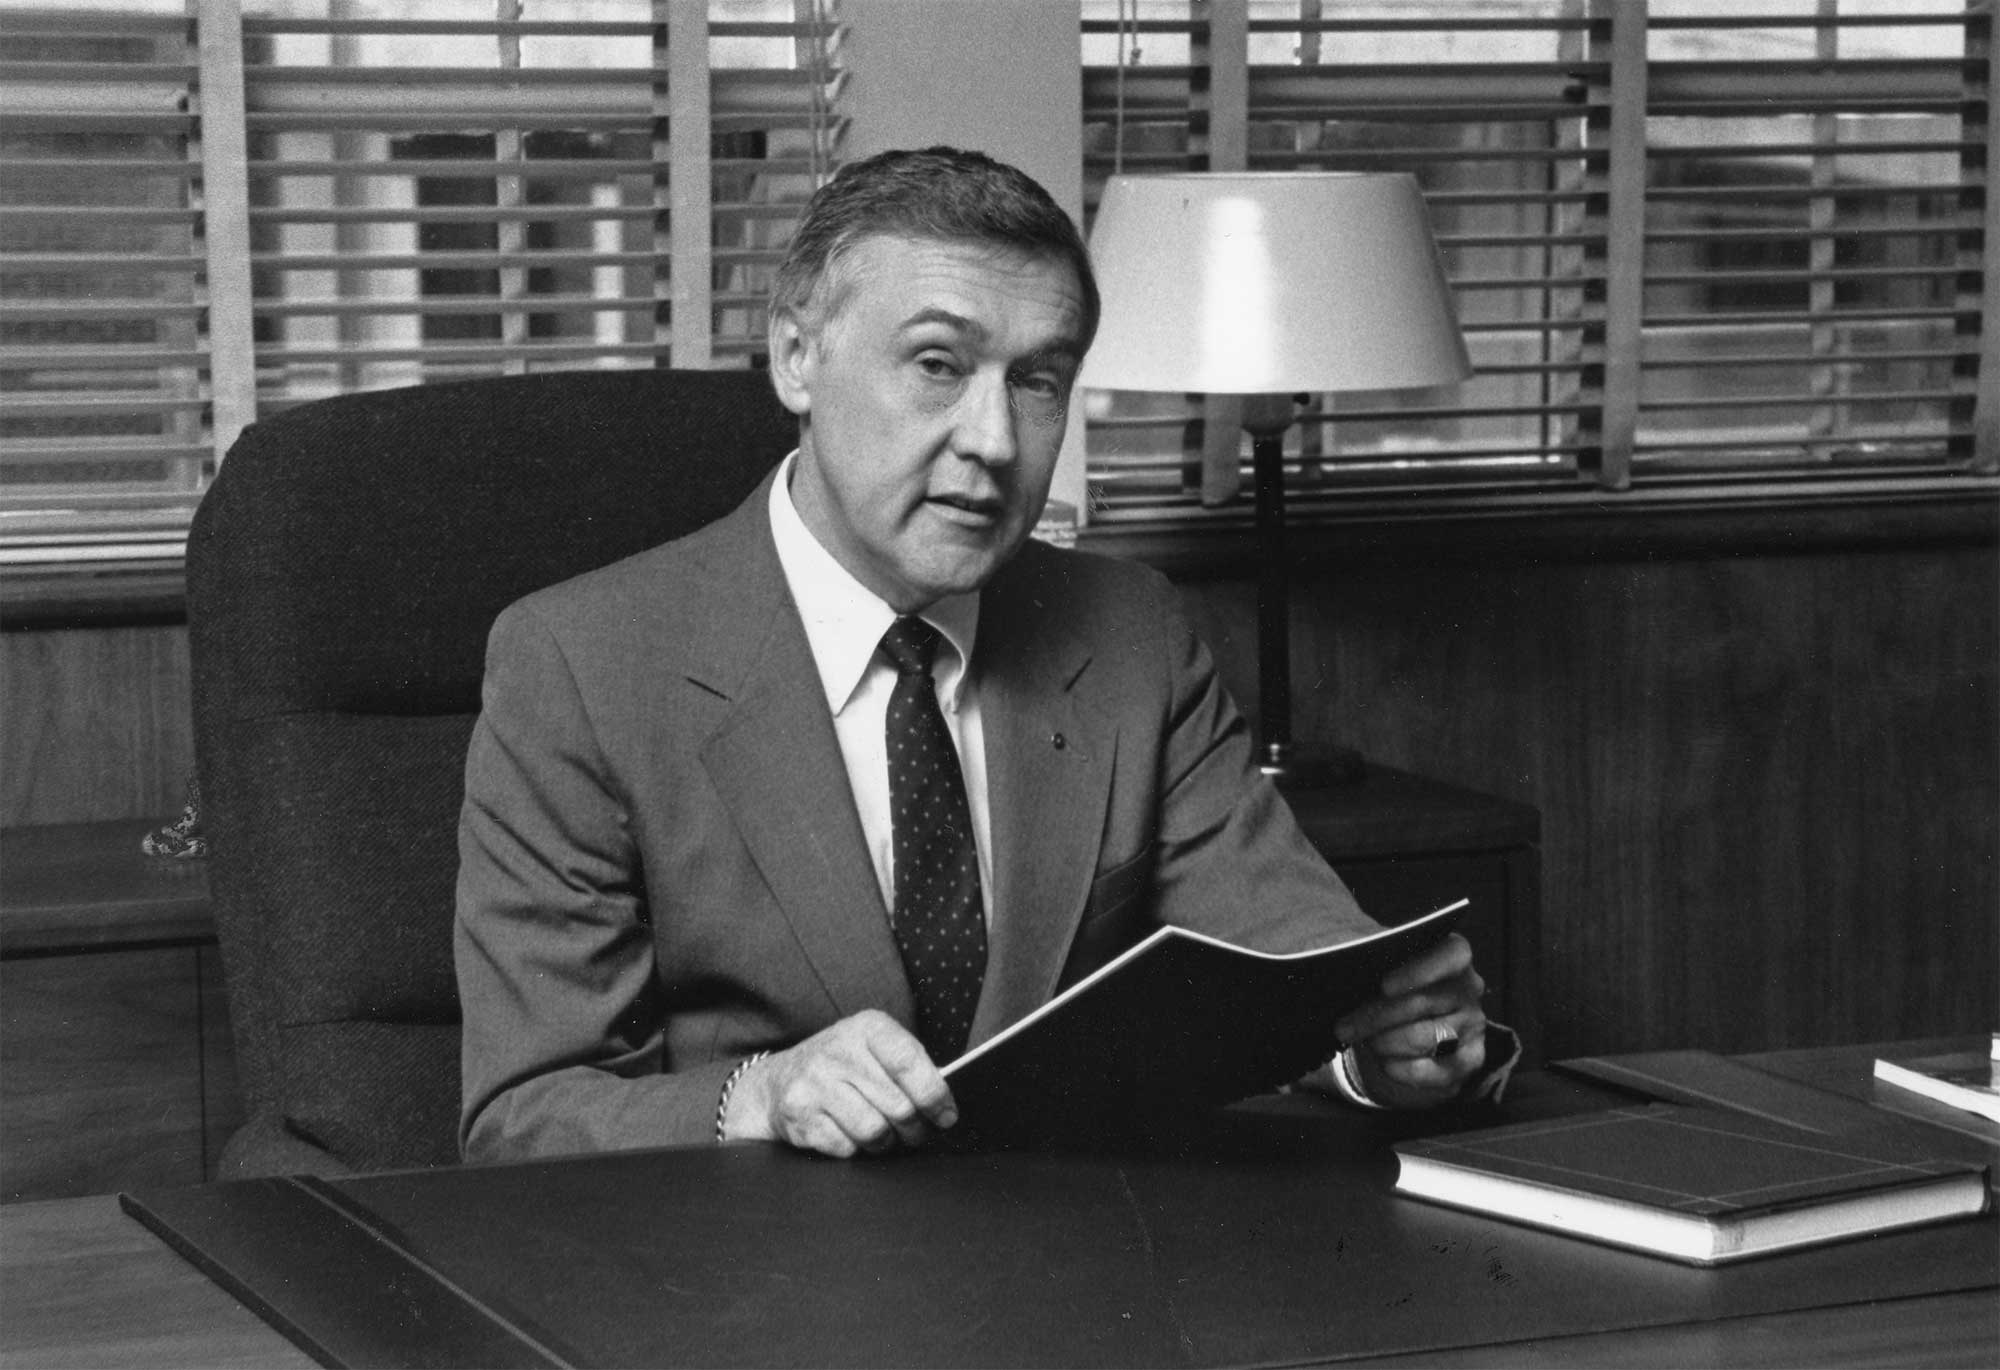 Win Phillips, longtime UF leader, dies at 83